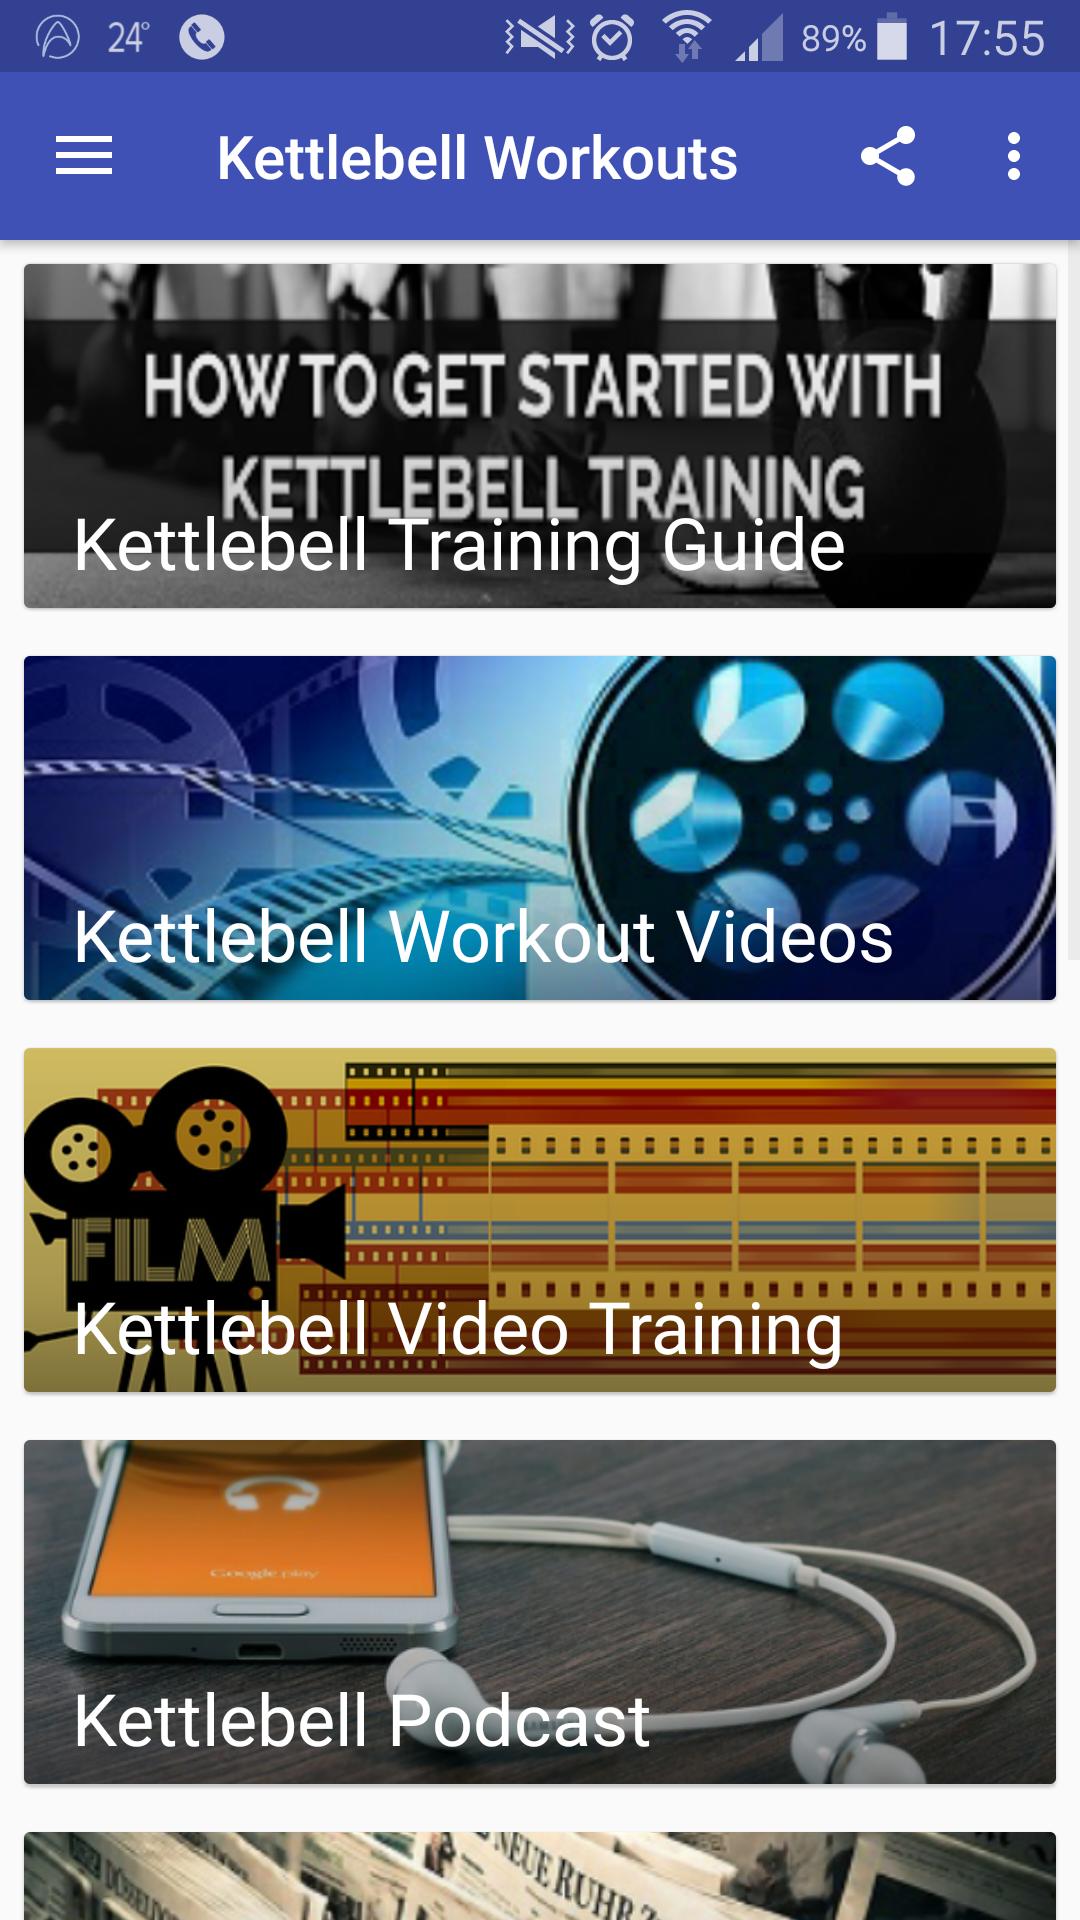 Kettlebell Workouts for Android - APK Download